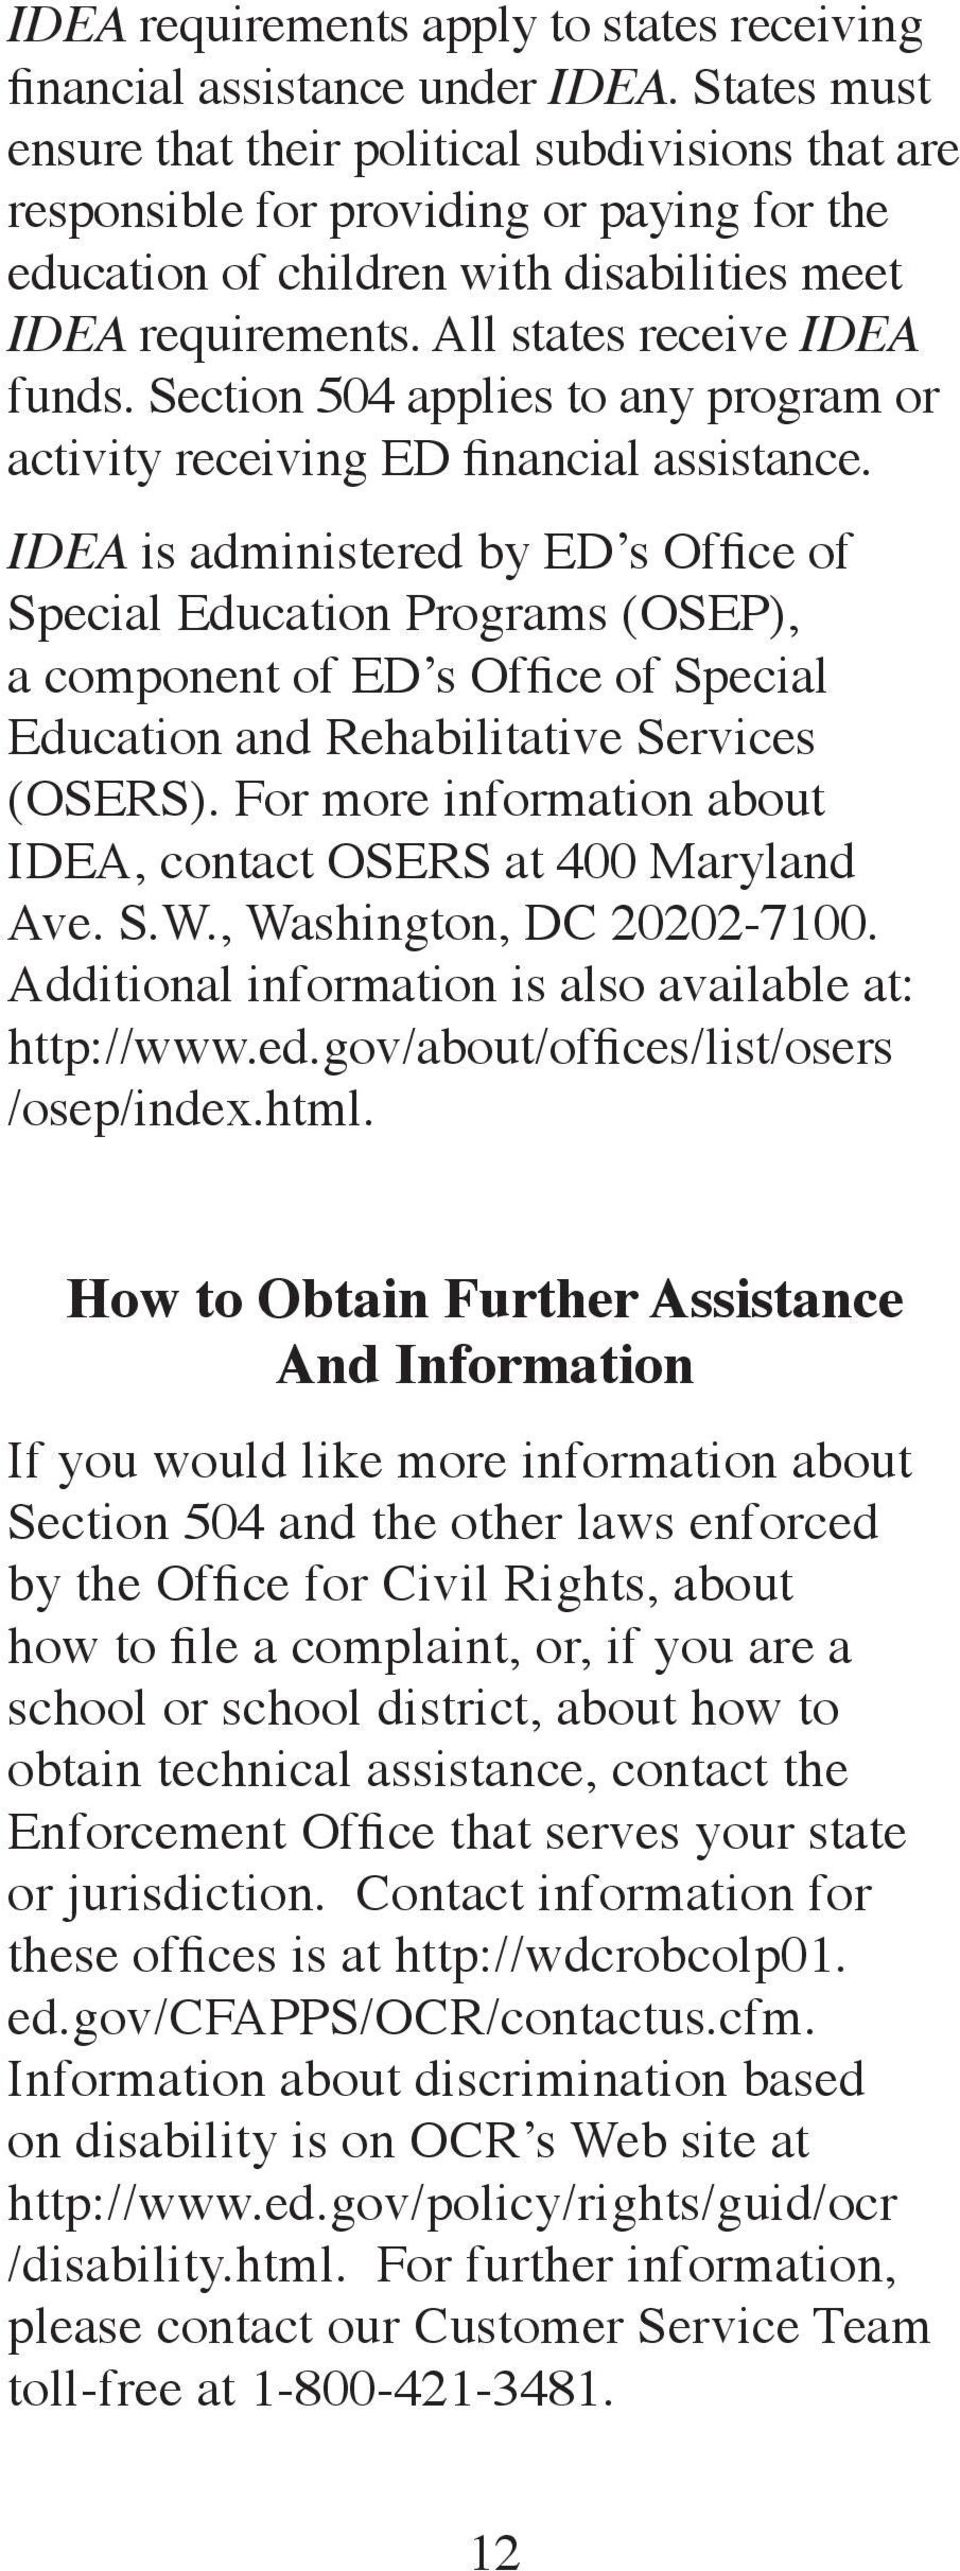 Section 504 applies to any program or activity receiving ED financial assistance.